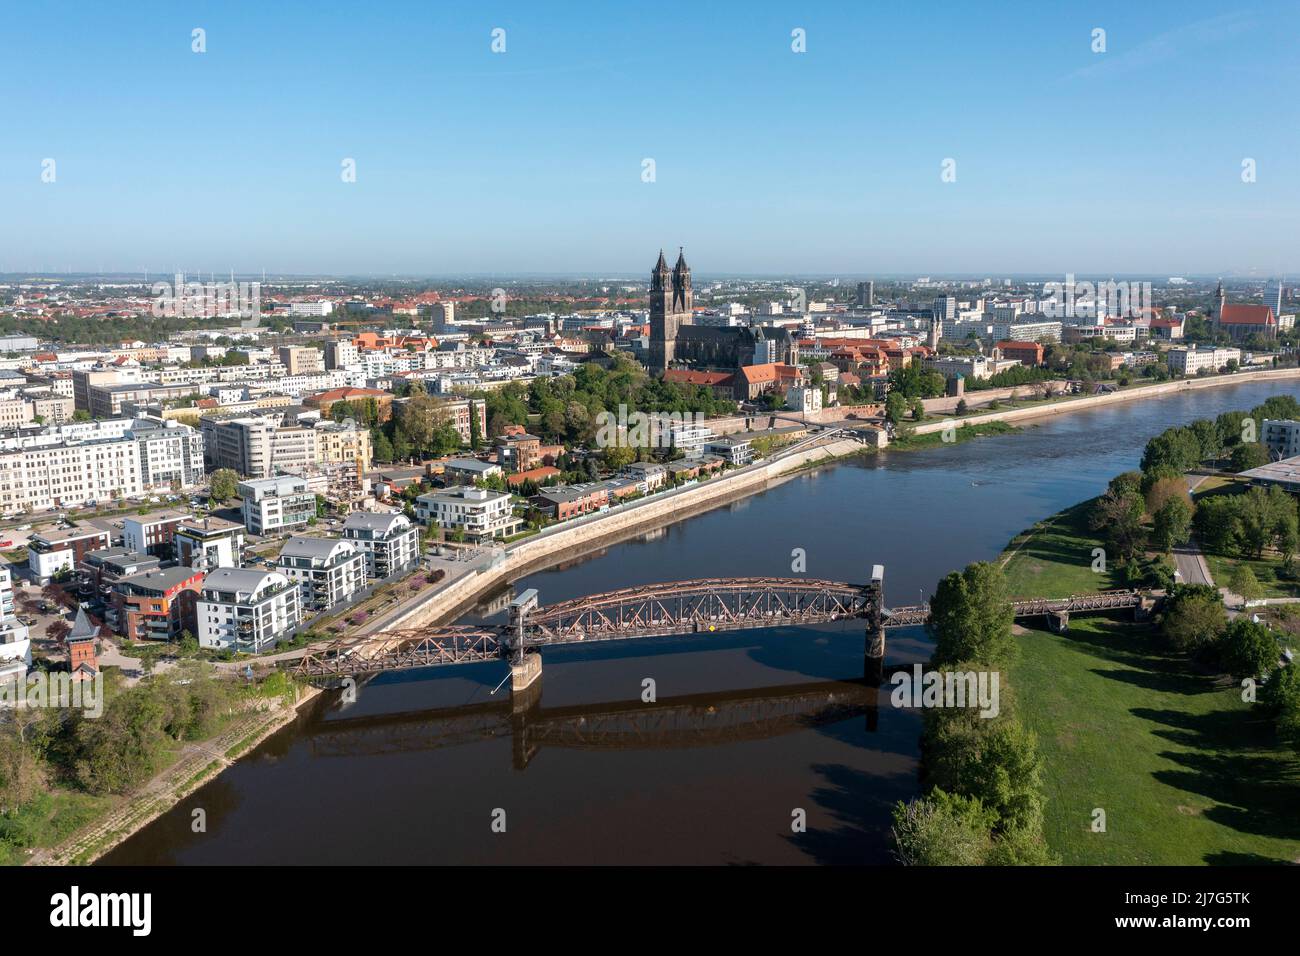 Historic lift bridge, behind it the Magdeburg Cathedral and the Elbe promenade, Magdeburg, Saxony-Anhalt, Germany Stock Photo